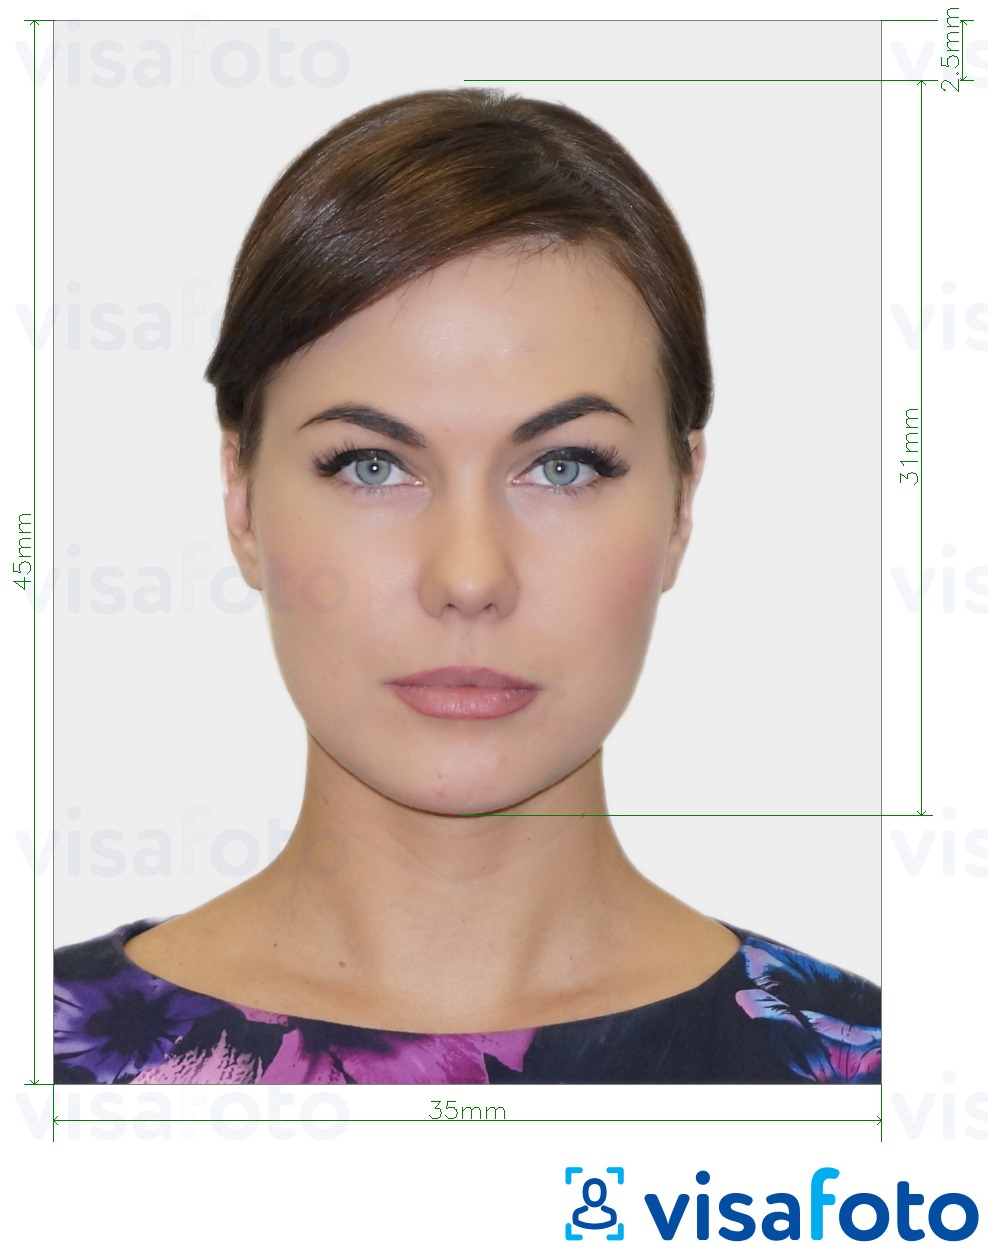 Example of photo for Belgium Visa 35x45 mm (3.5x4.5 cm) with exact size specification